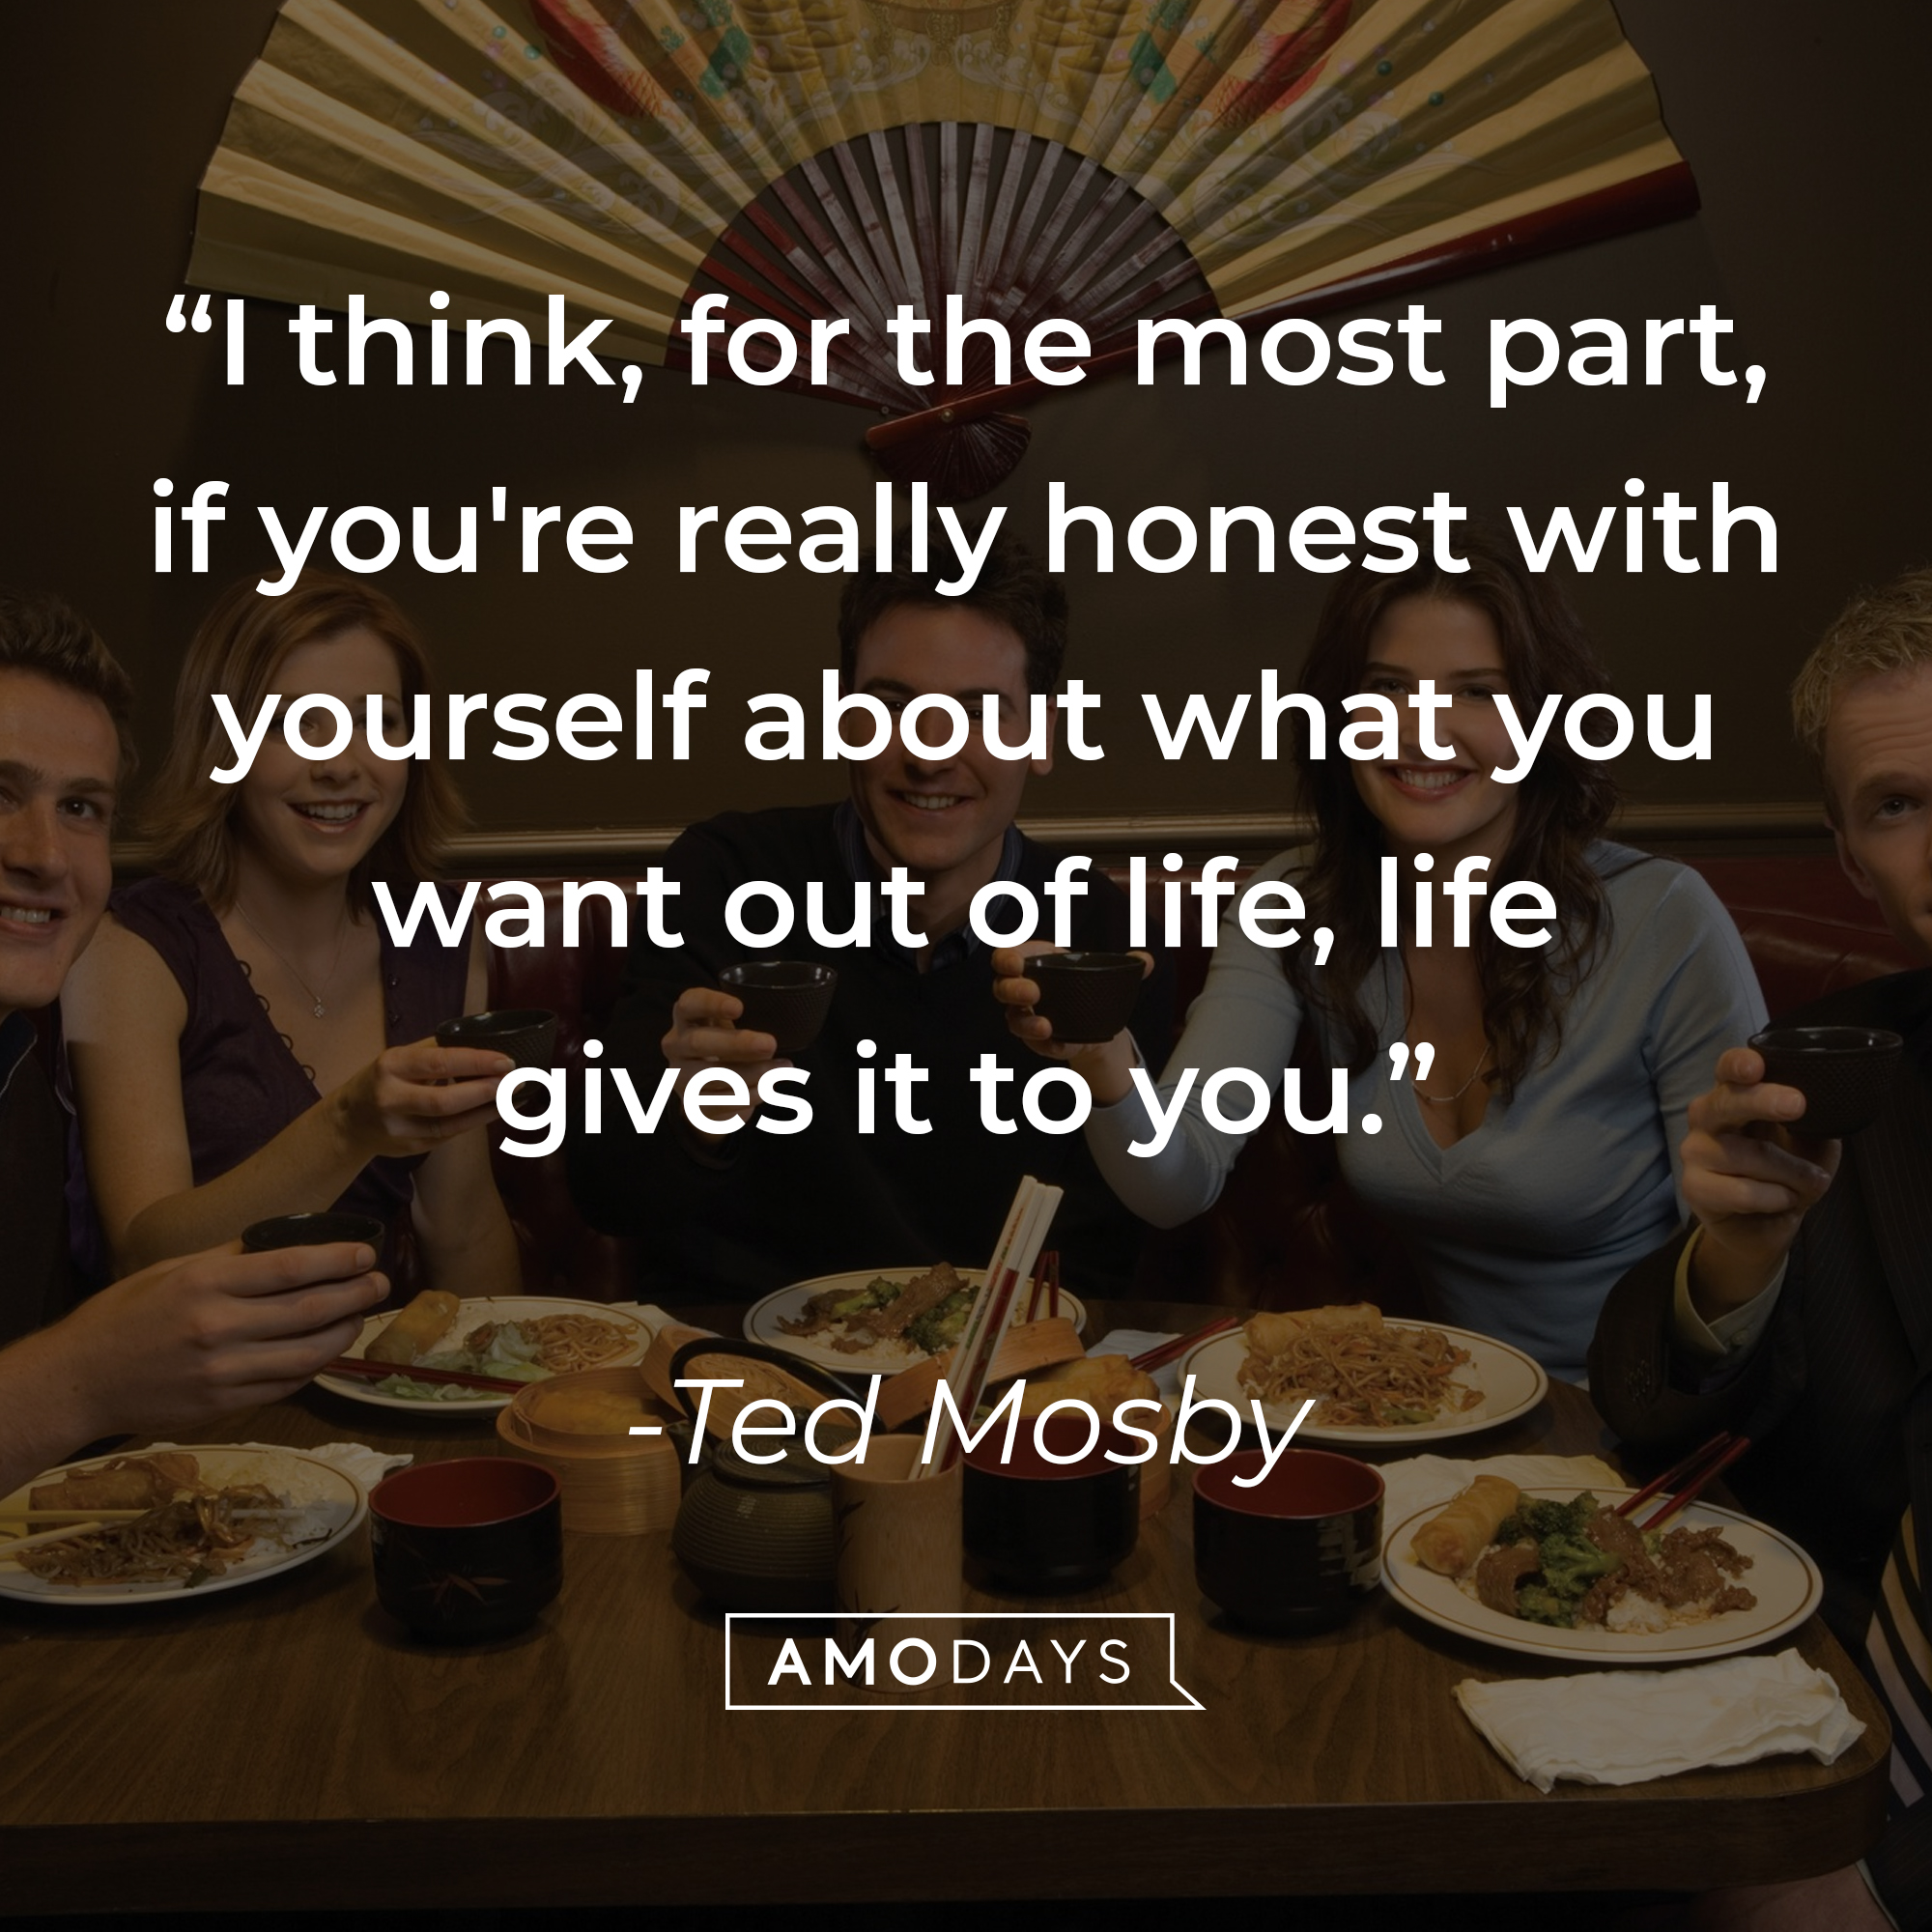 Ted Mosby's quote: “I think, for the most part, if you're really honest with yourself about what you want out of life, life gives it to you.” | Source: facebook.com/OfficialHowIMetYourMother